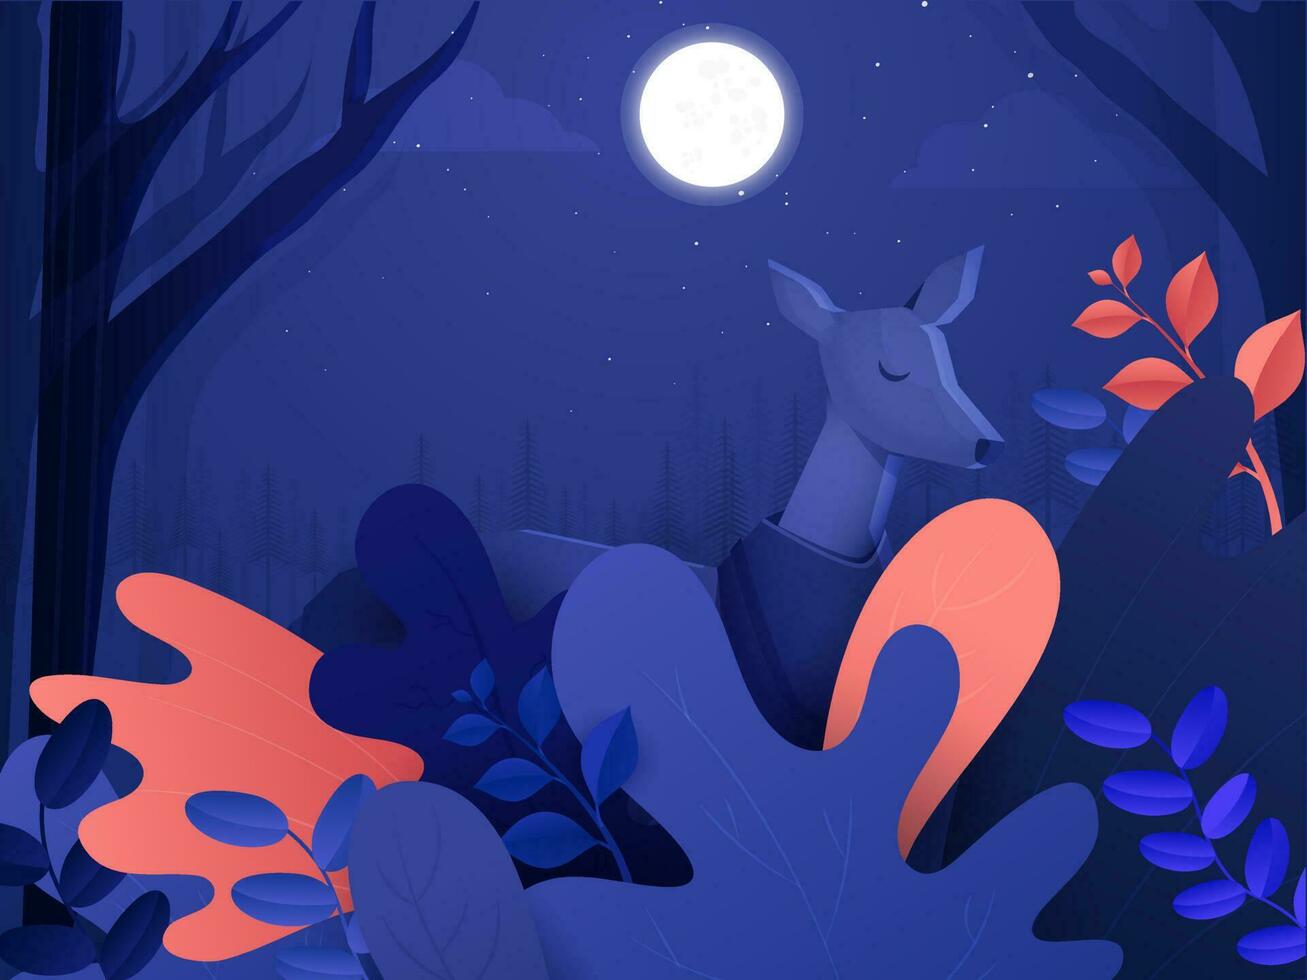 Cartoon Animal Deer Standing on Beautiful Forest with Full Moon Night purple background. vector